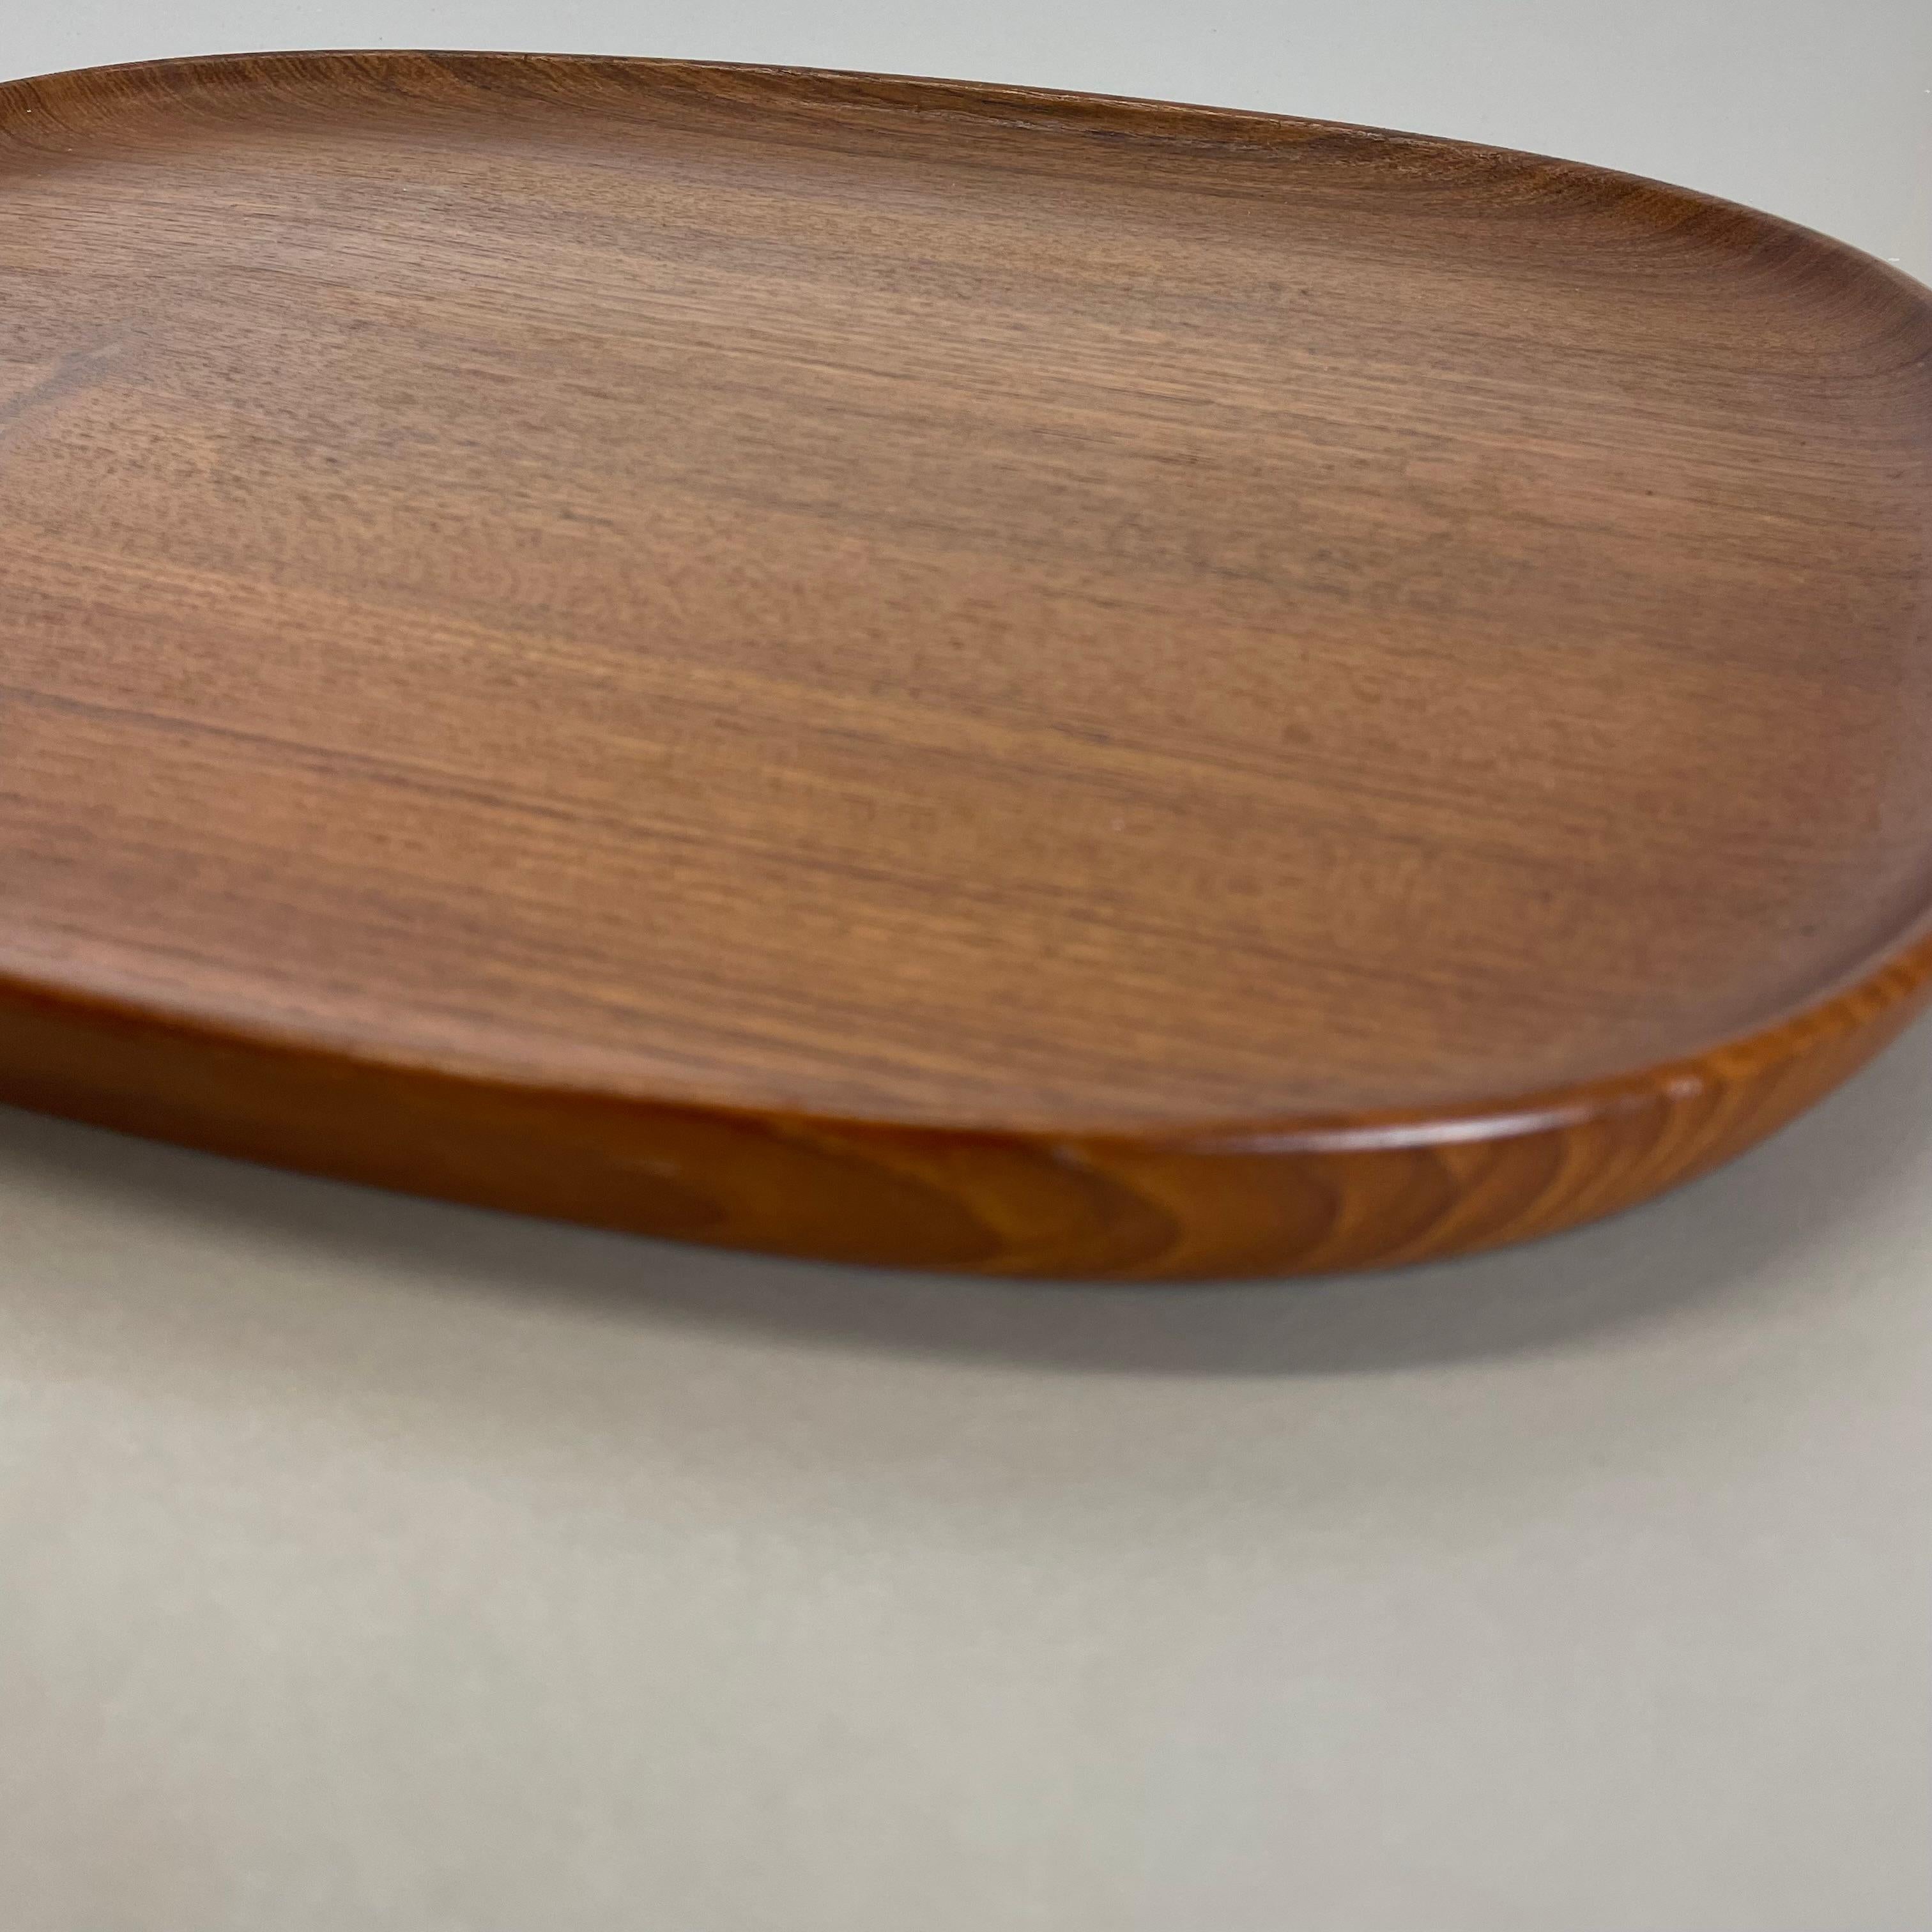 Large TEAK Tray Plate Element with Brass Handle by Carl Auböck, Austria, 1950s For Sale 1